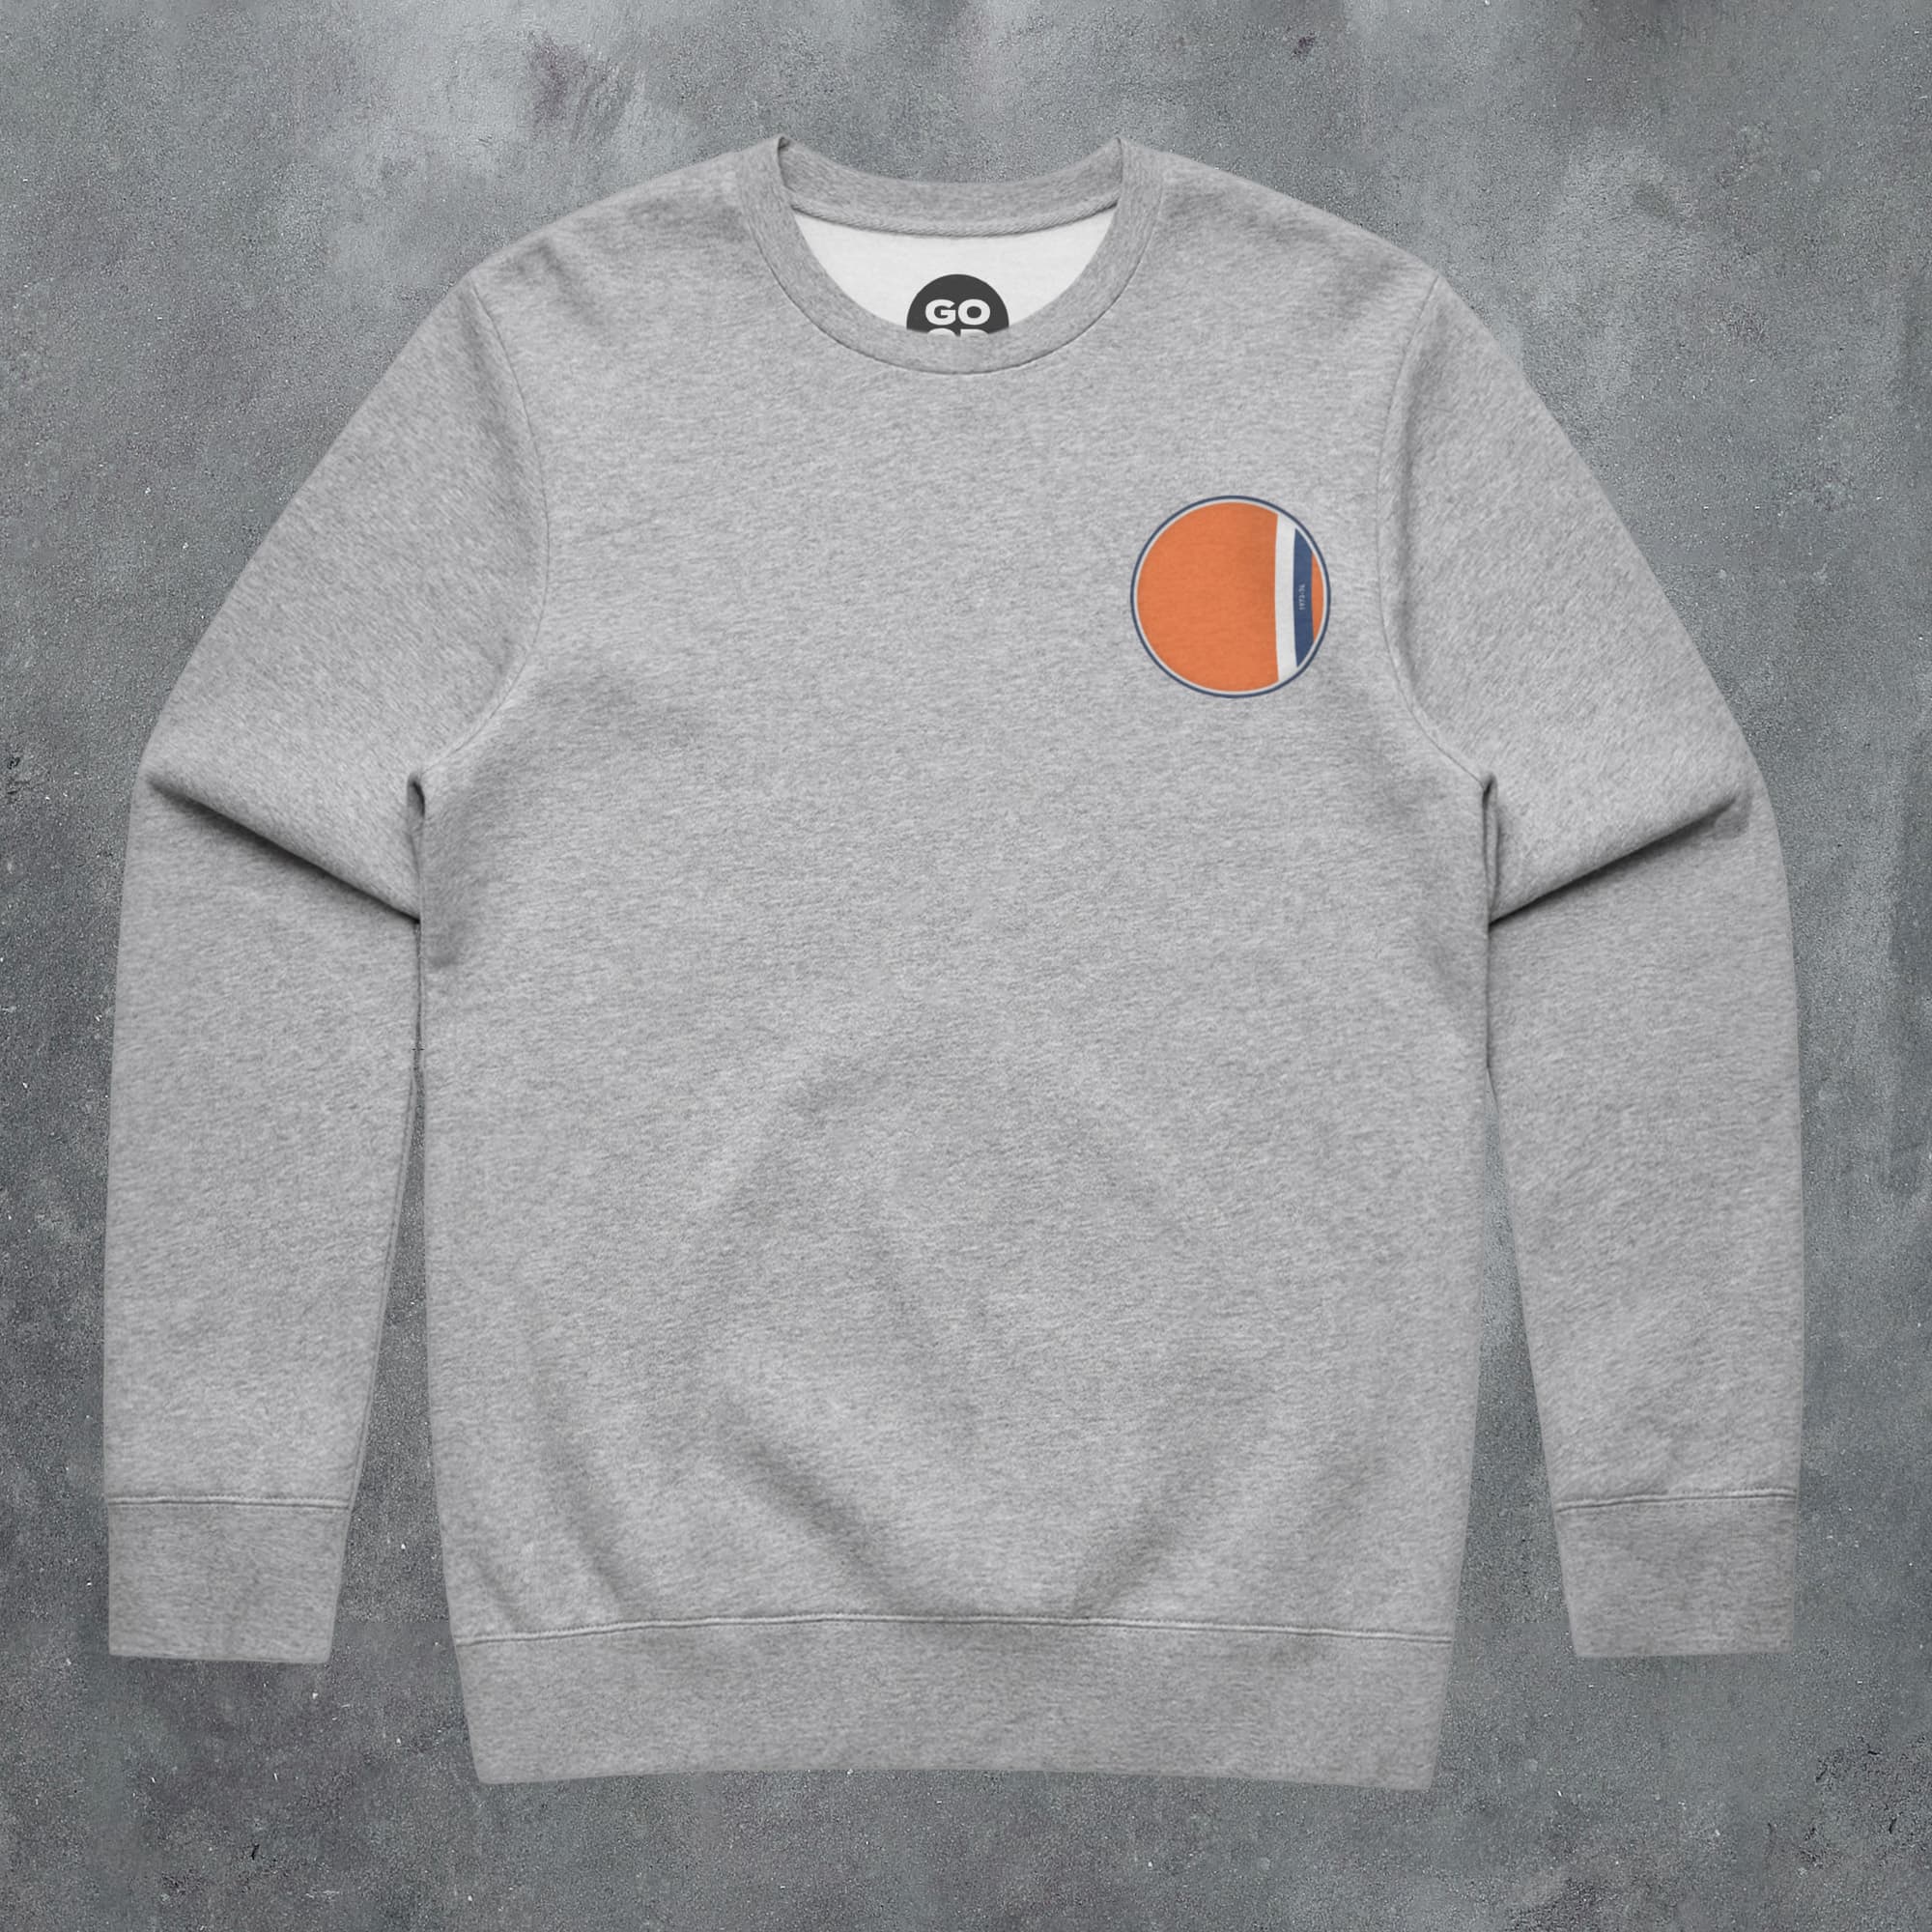 a grey sweatshirt with an orange circle on the chest